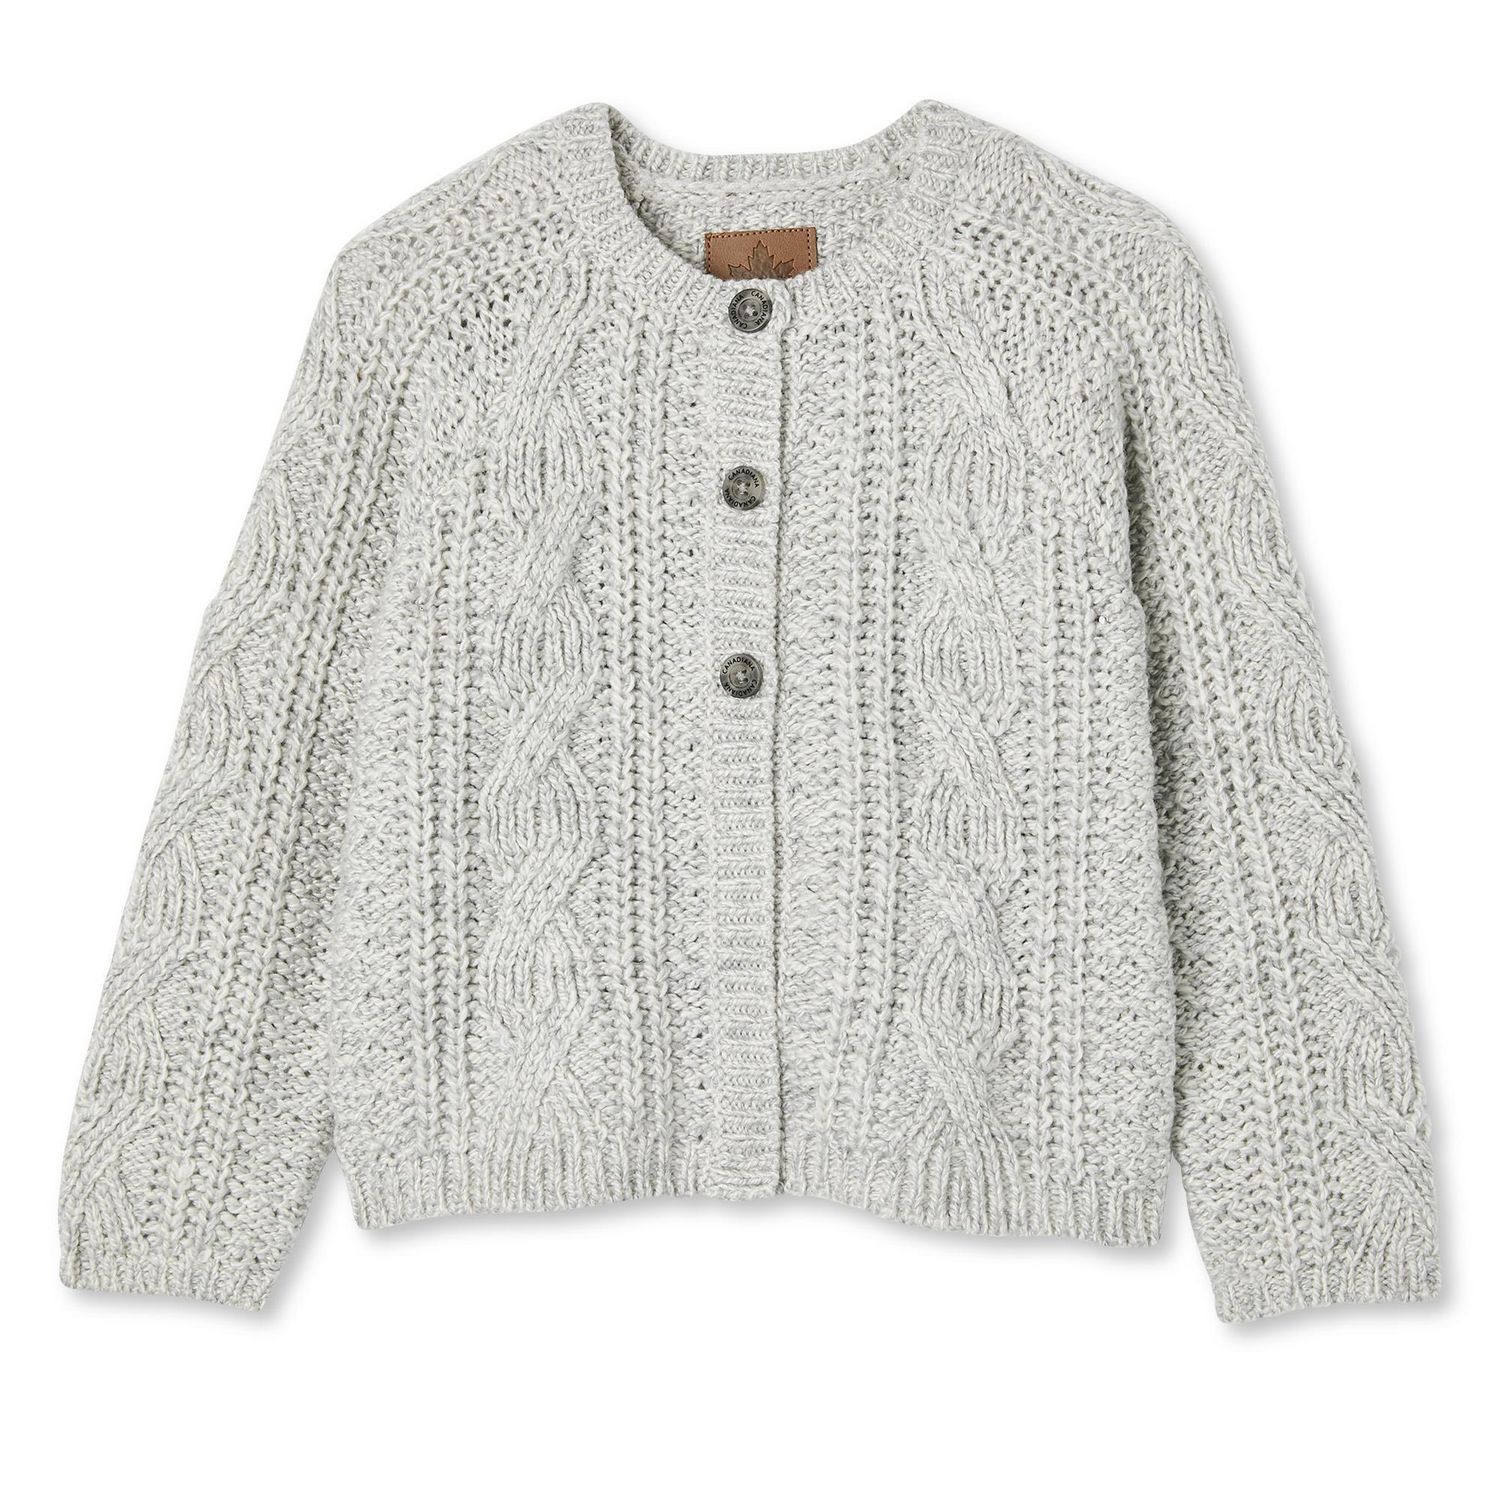 Canadiana Toddler Girls' Cable Knit Swing Cardigan | Walmart Canada